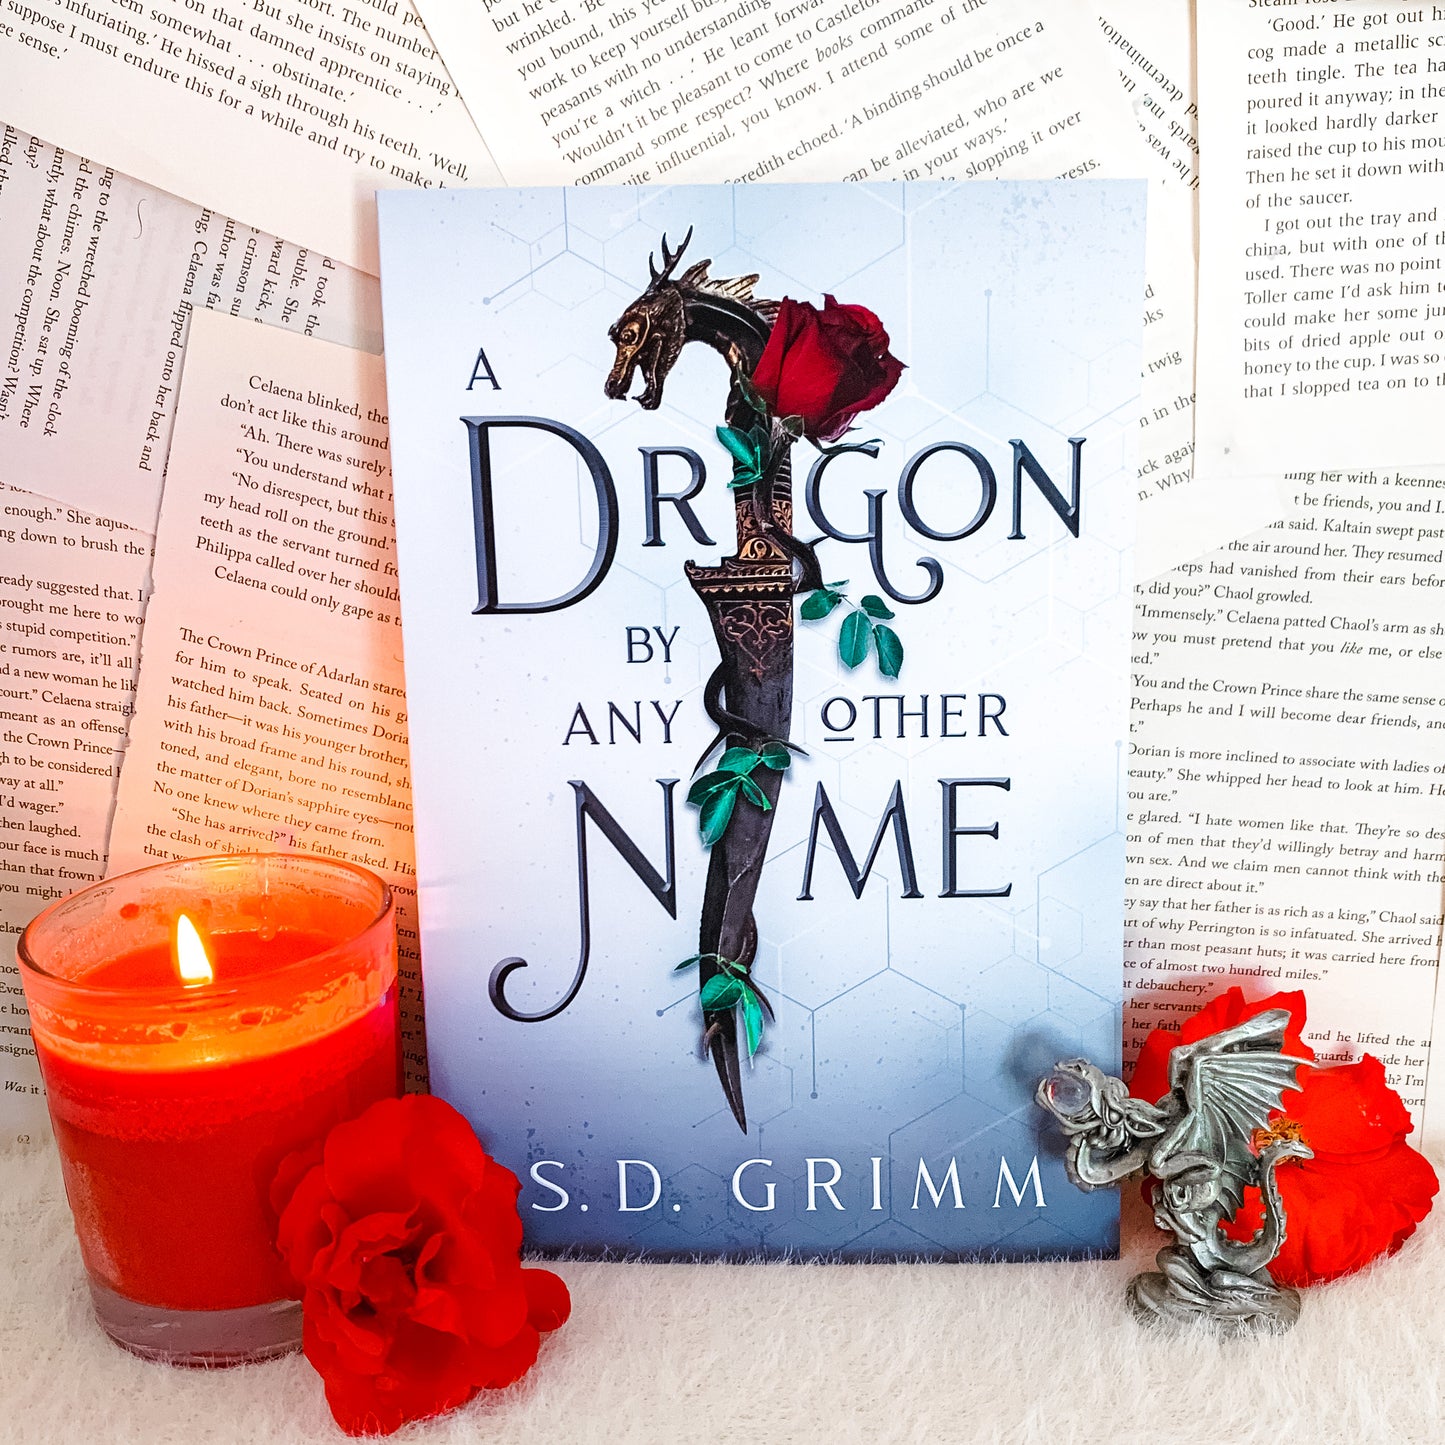 A Dragon by Any Other Name by S. D. Grimm